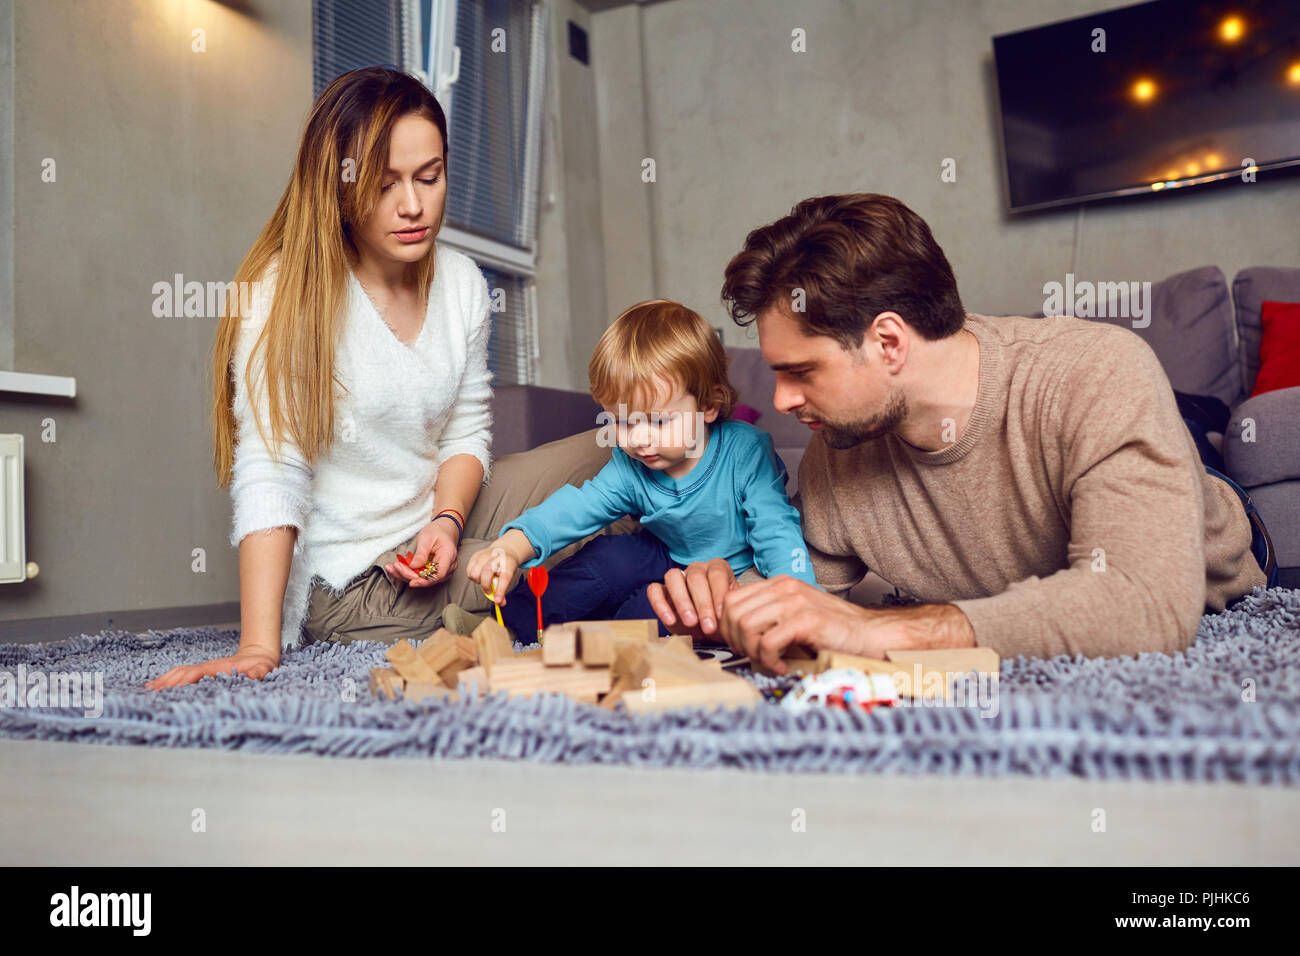 A family with a child plays board games indoors Stock Photo